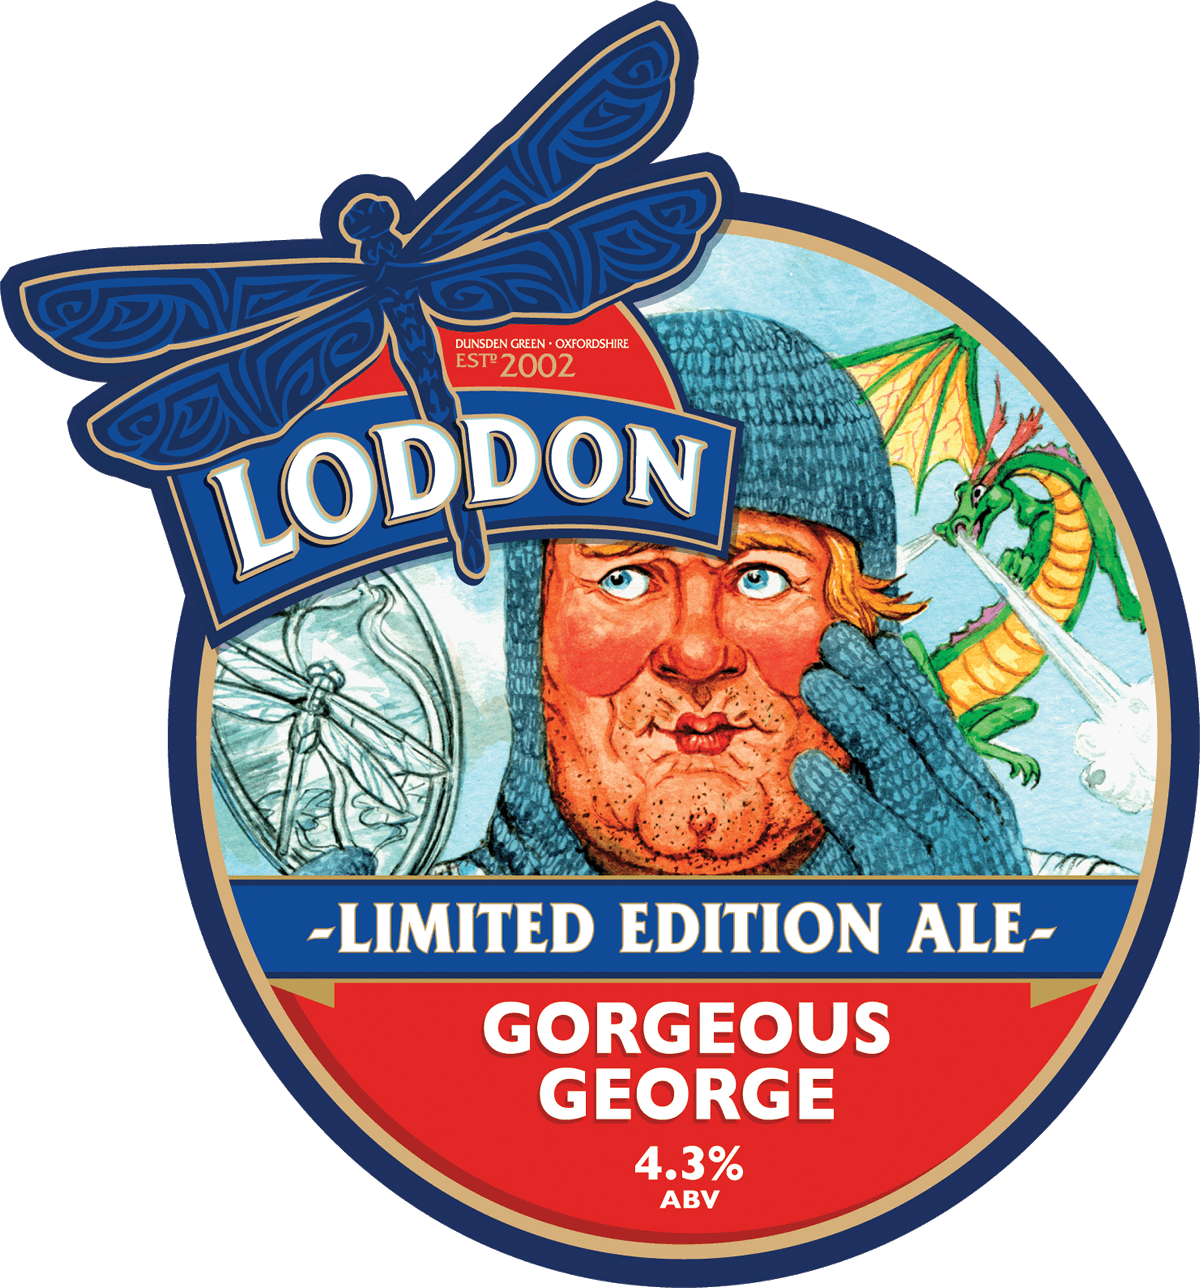 Loddon Brewery - Limited Edition Ale - Gorgeous George